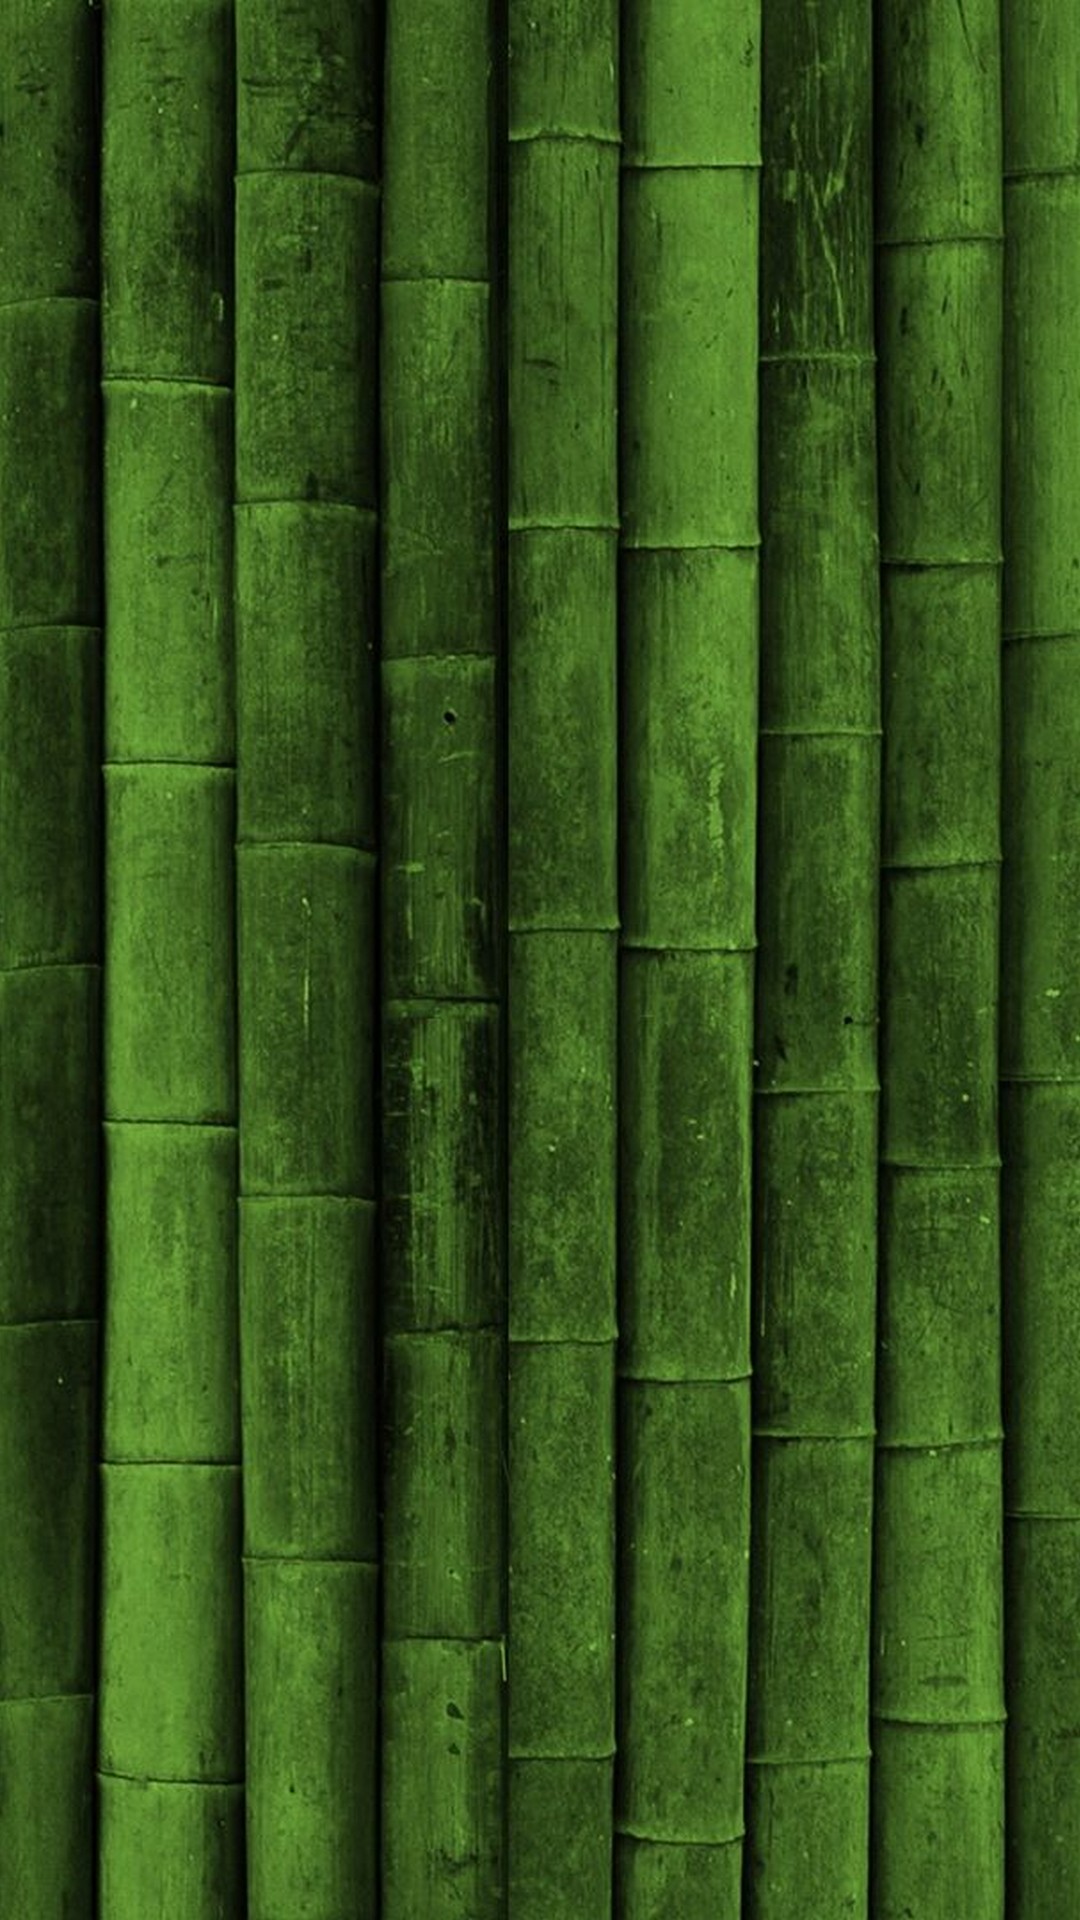 Iphone Wallpaper Dark Green With Image Resolution Pixel - Dark Green Wallpaper Iphone 7 - HD Wallpaper 